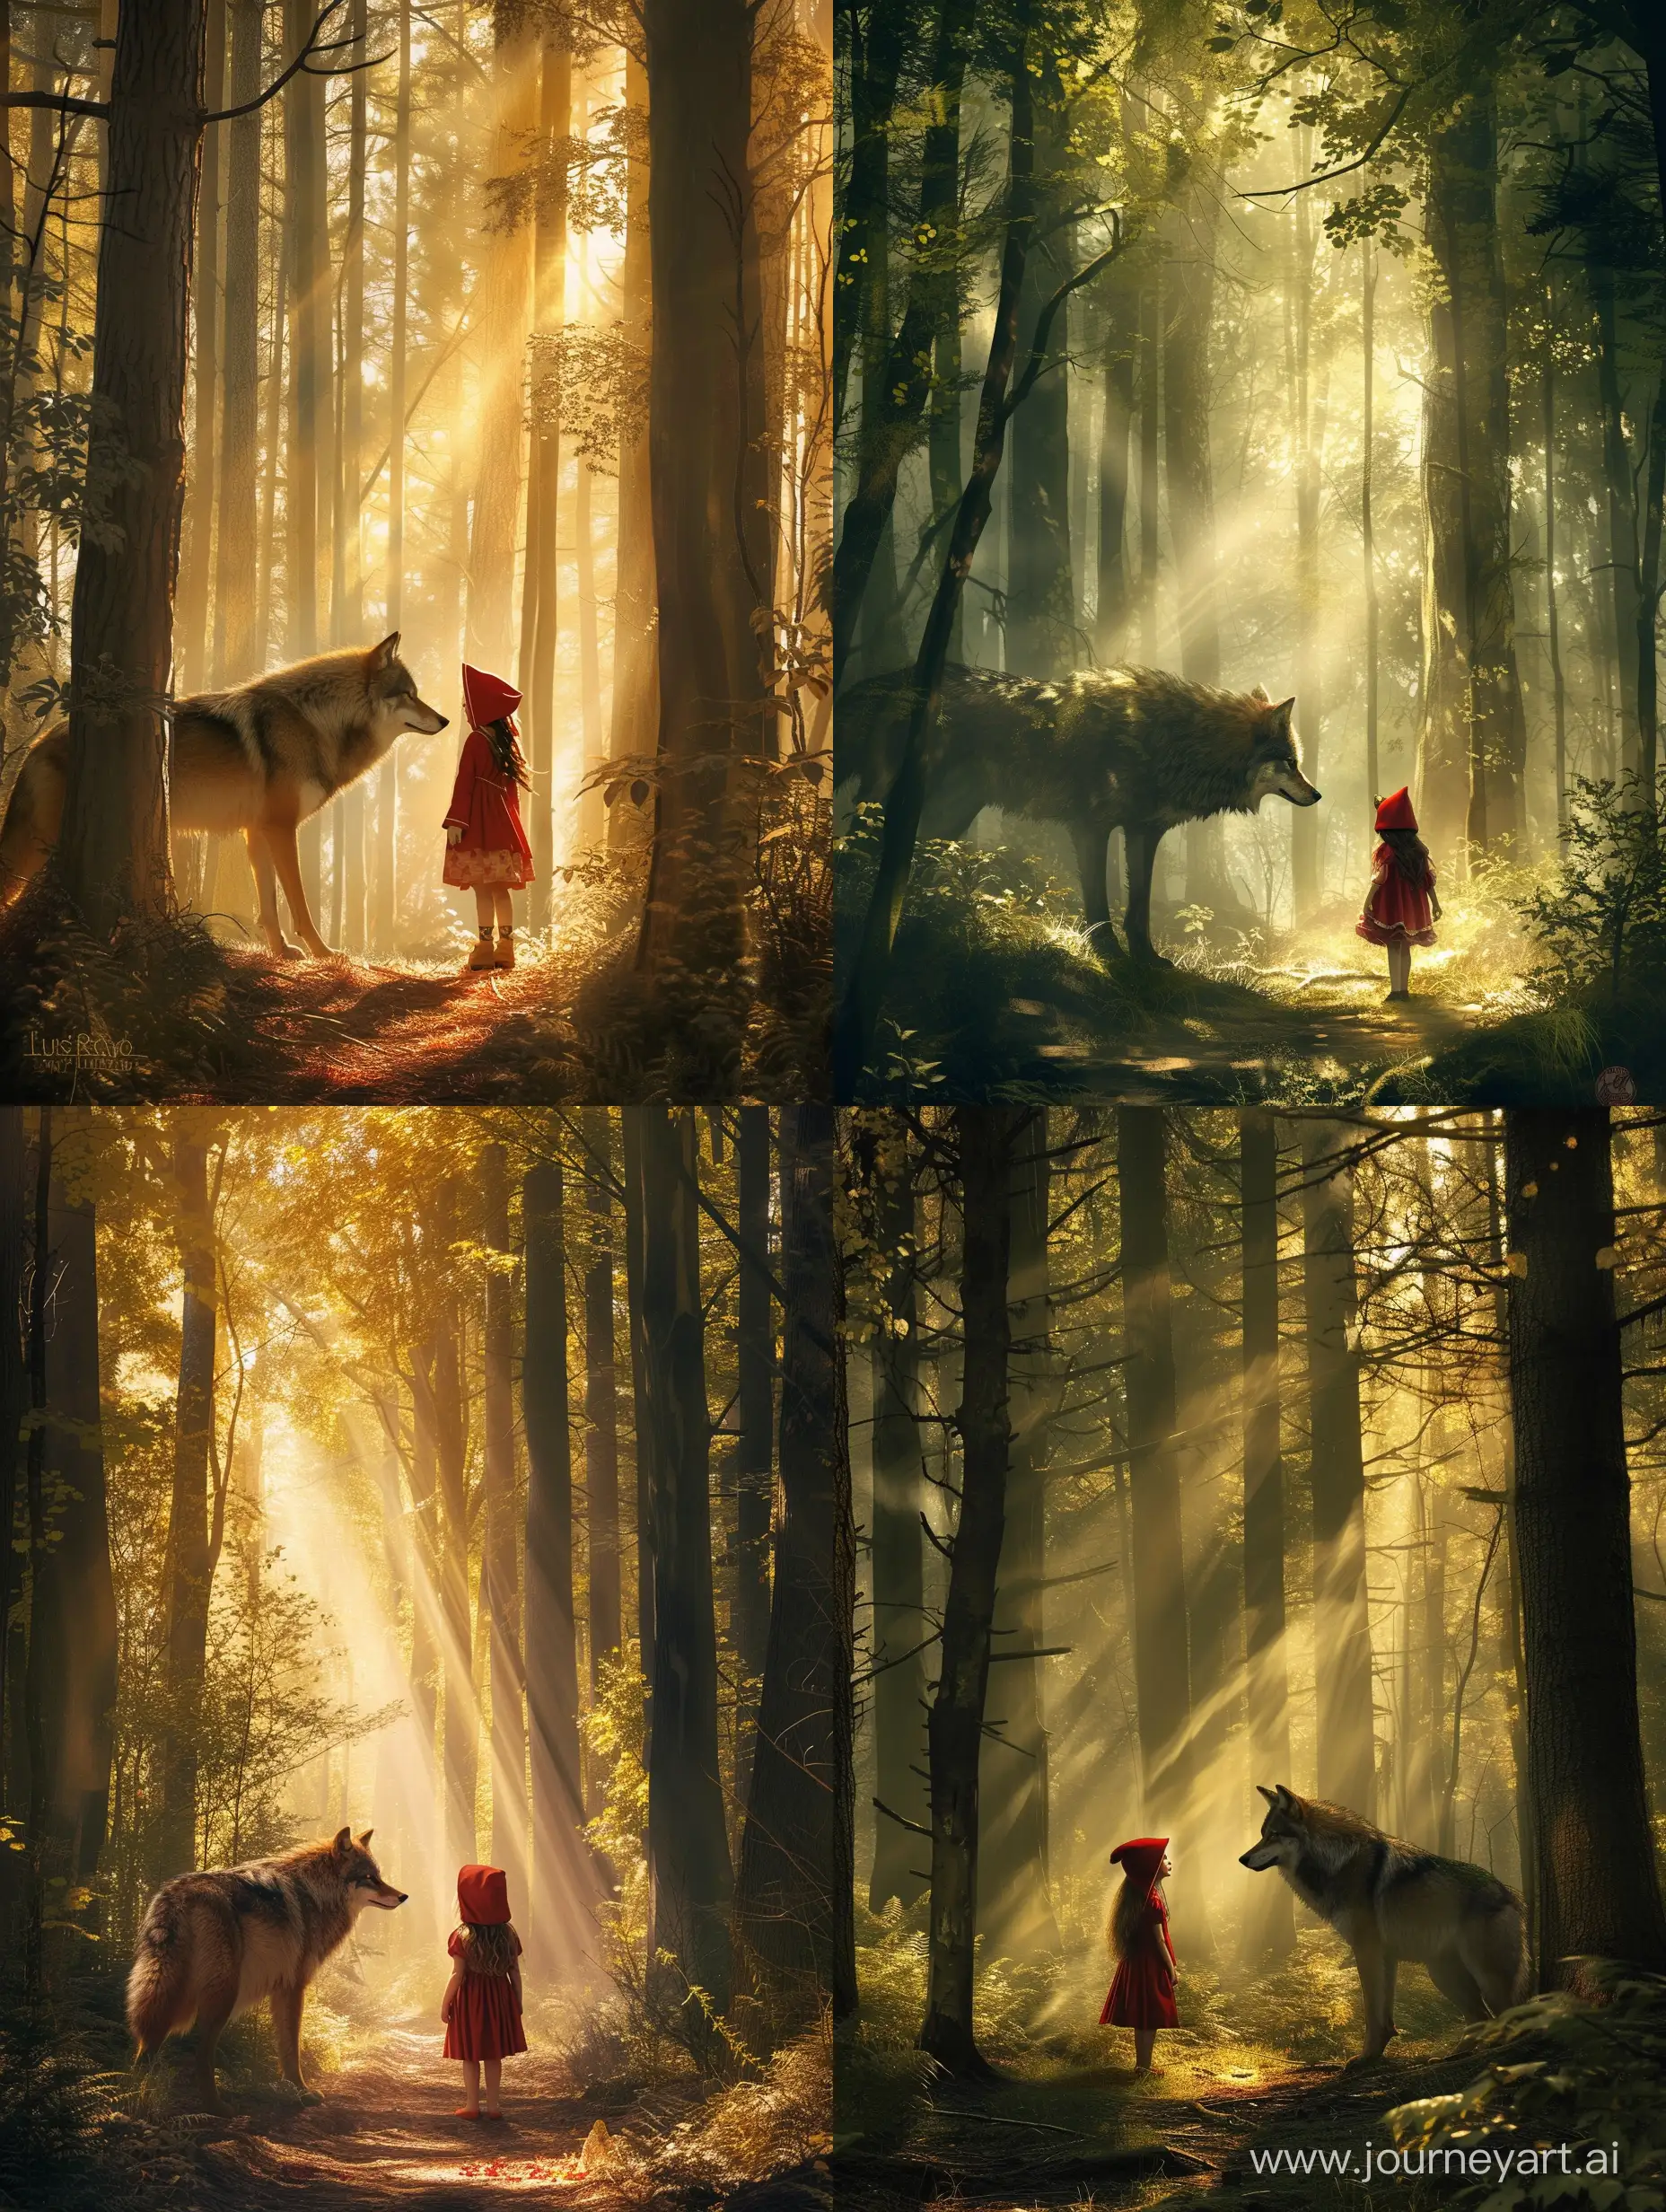 Enchanting-Encounter-Little-Red-Riding-Hood-and-the-Mysterious-Wolf-in-Raw-Art-Style